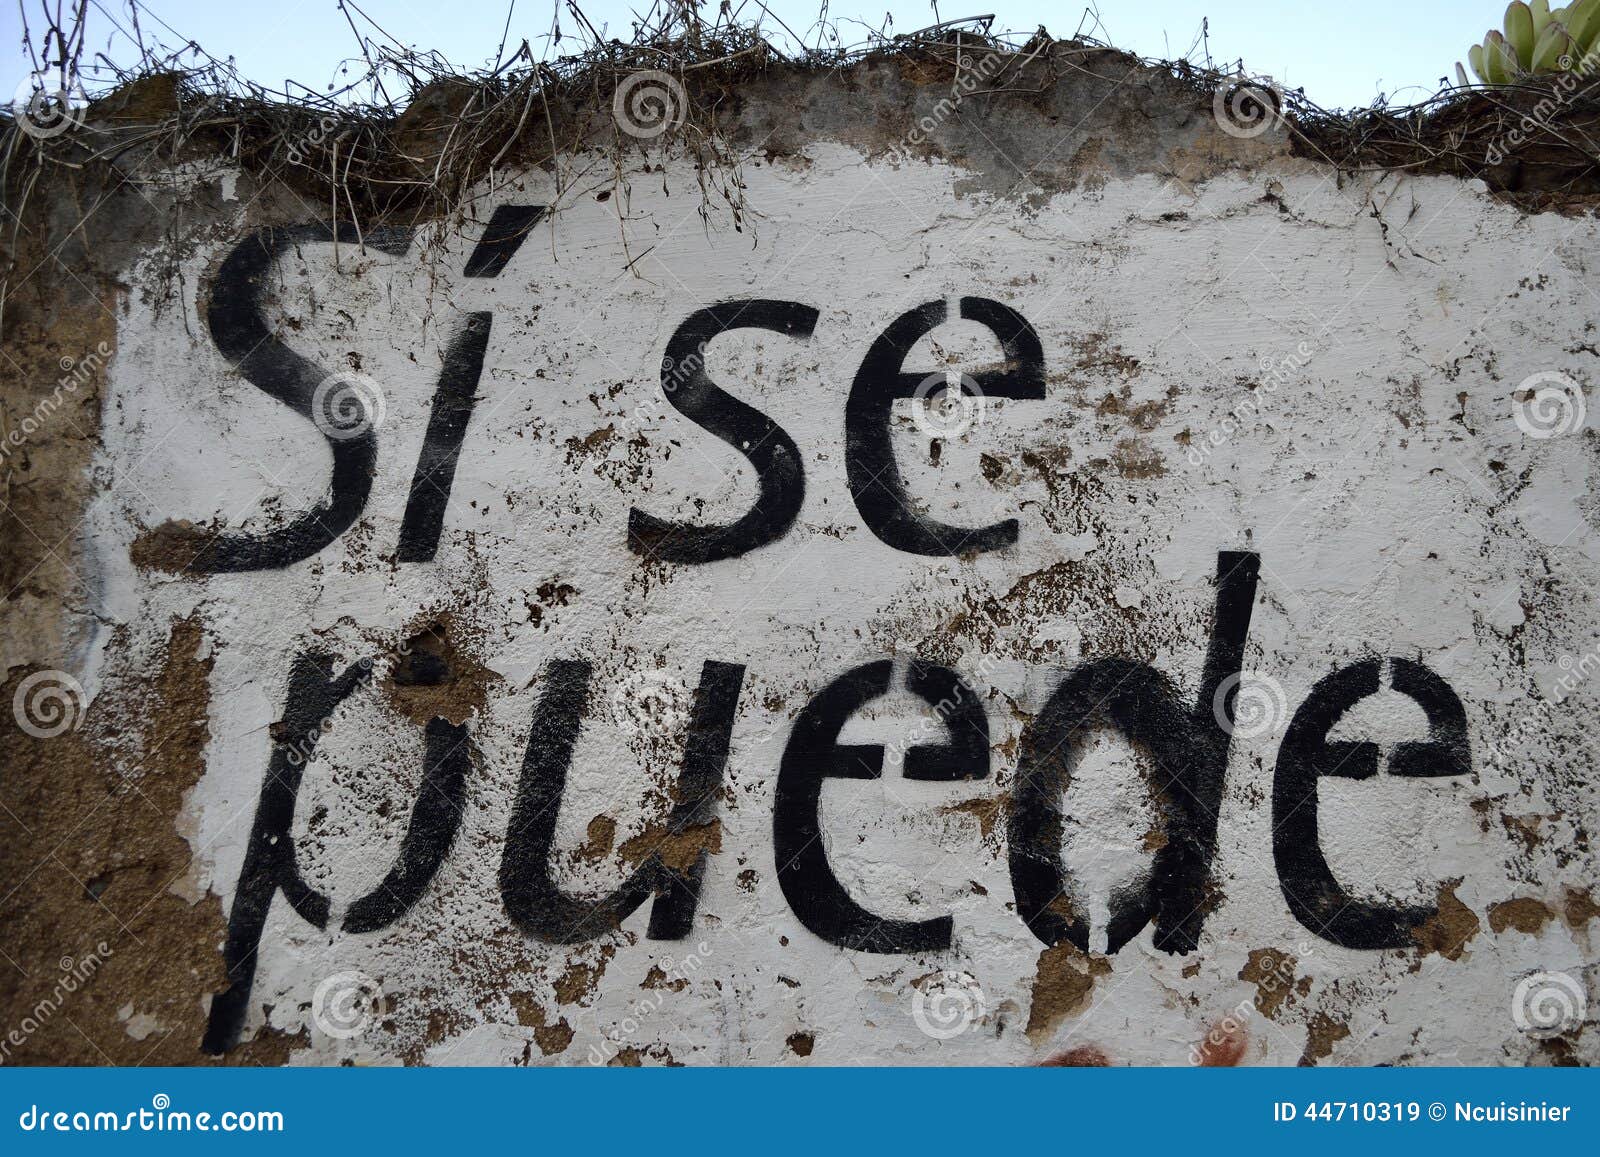 spanish text painted on a wall: si se puede